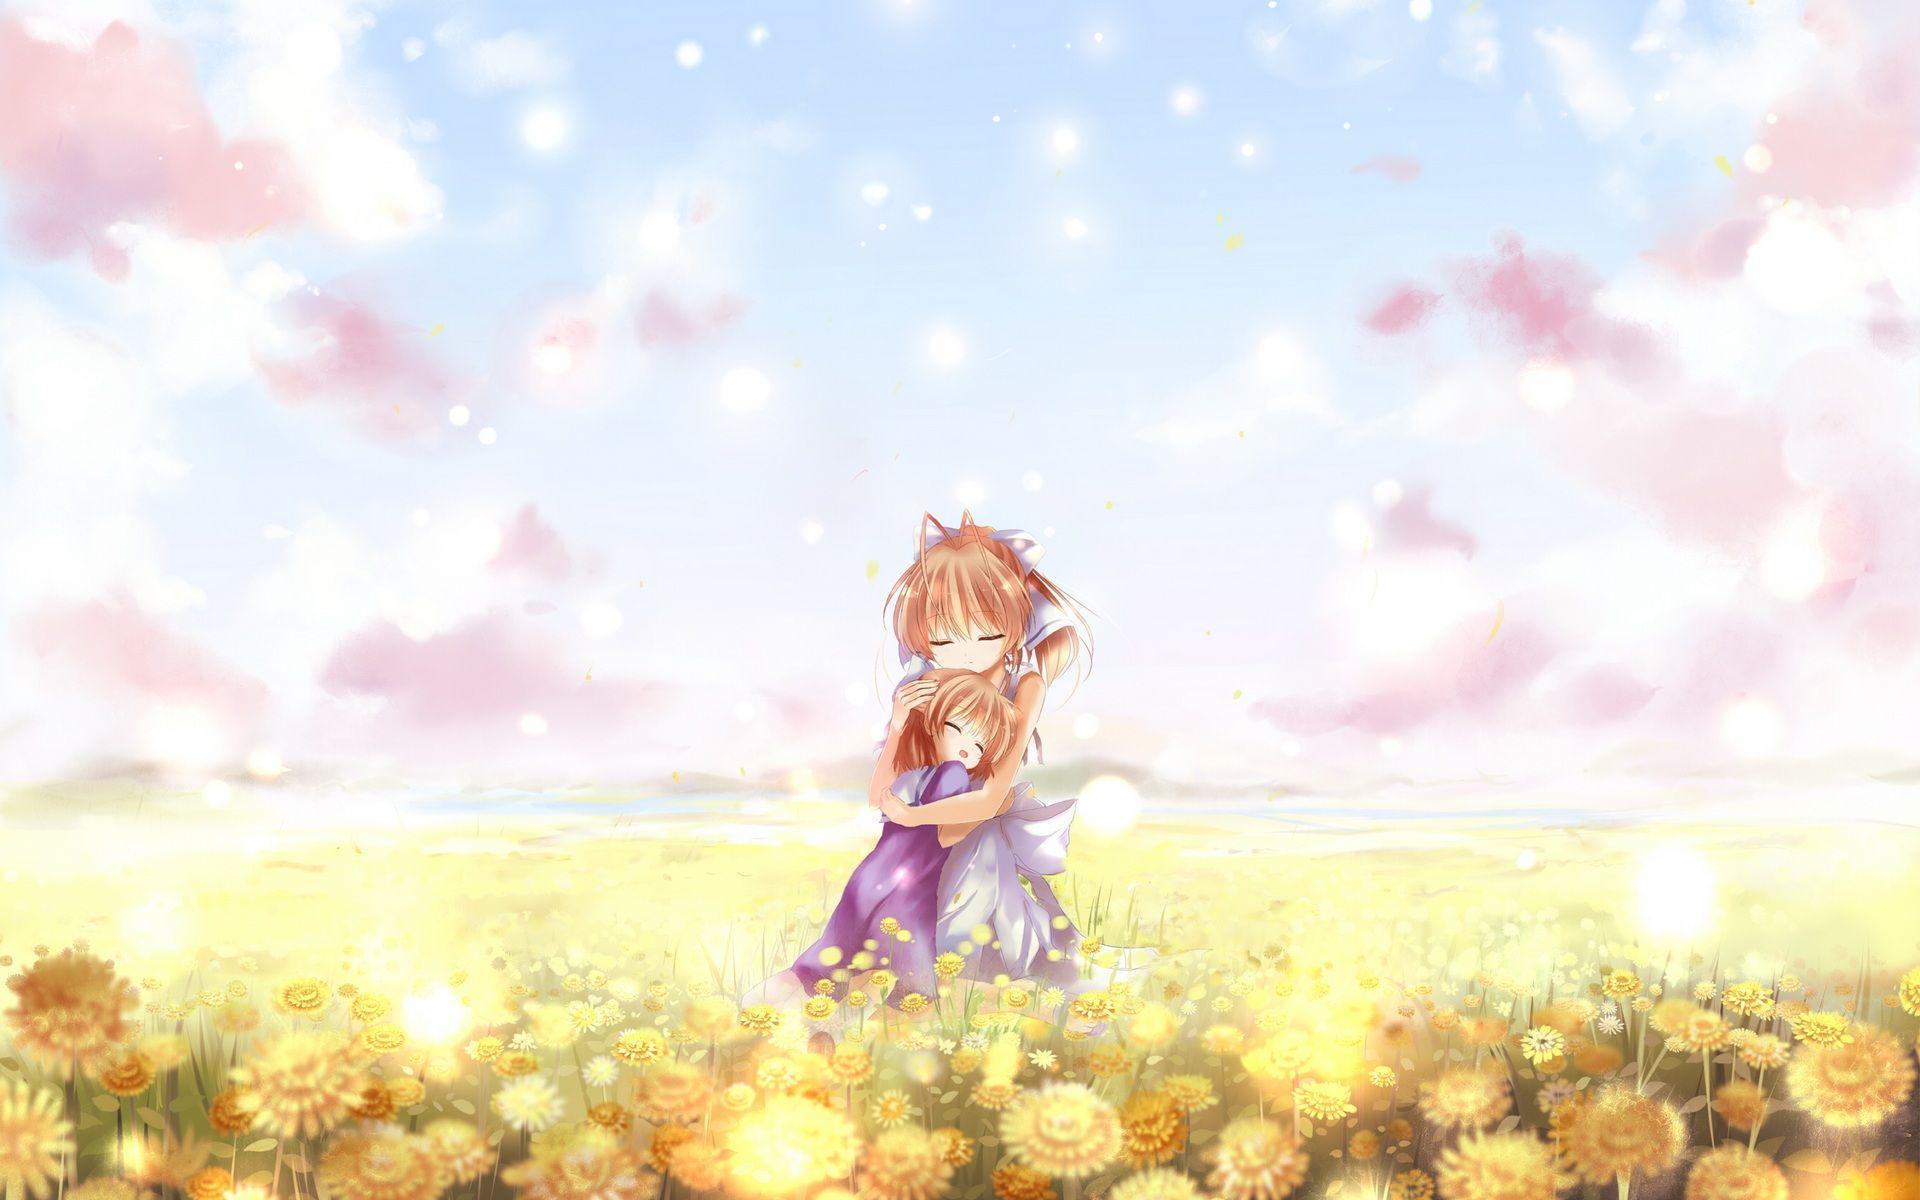 Wallpaper For – Clannad After Story Wallpapers